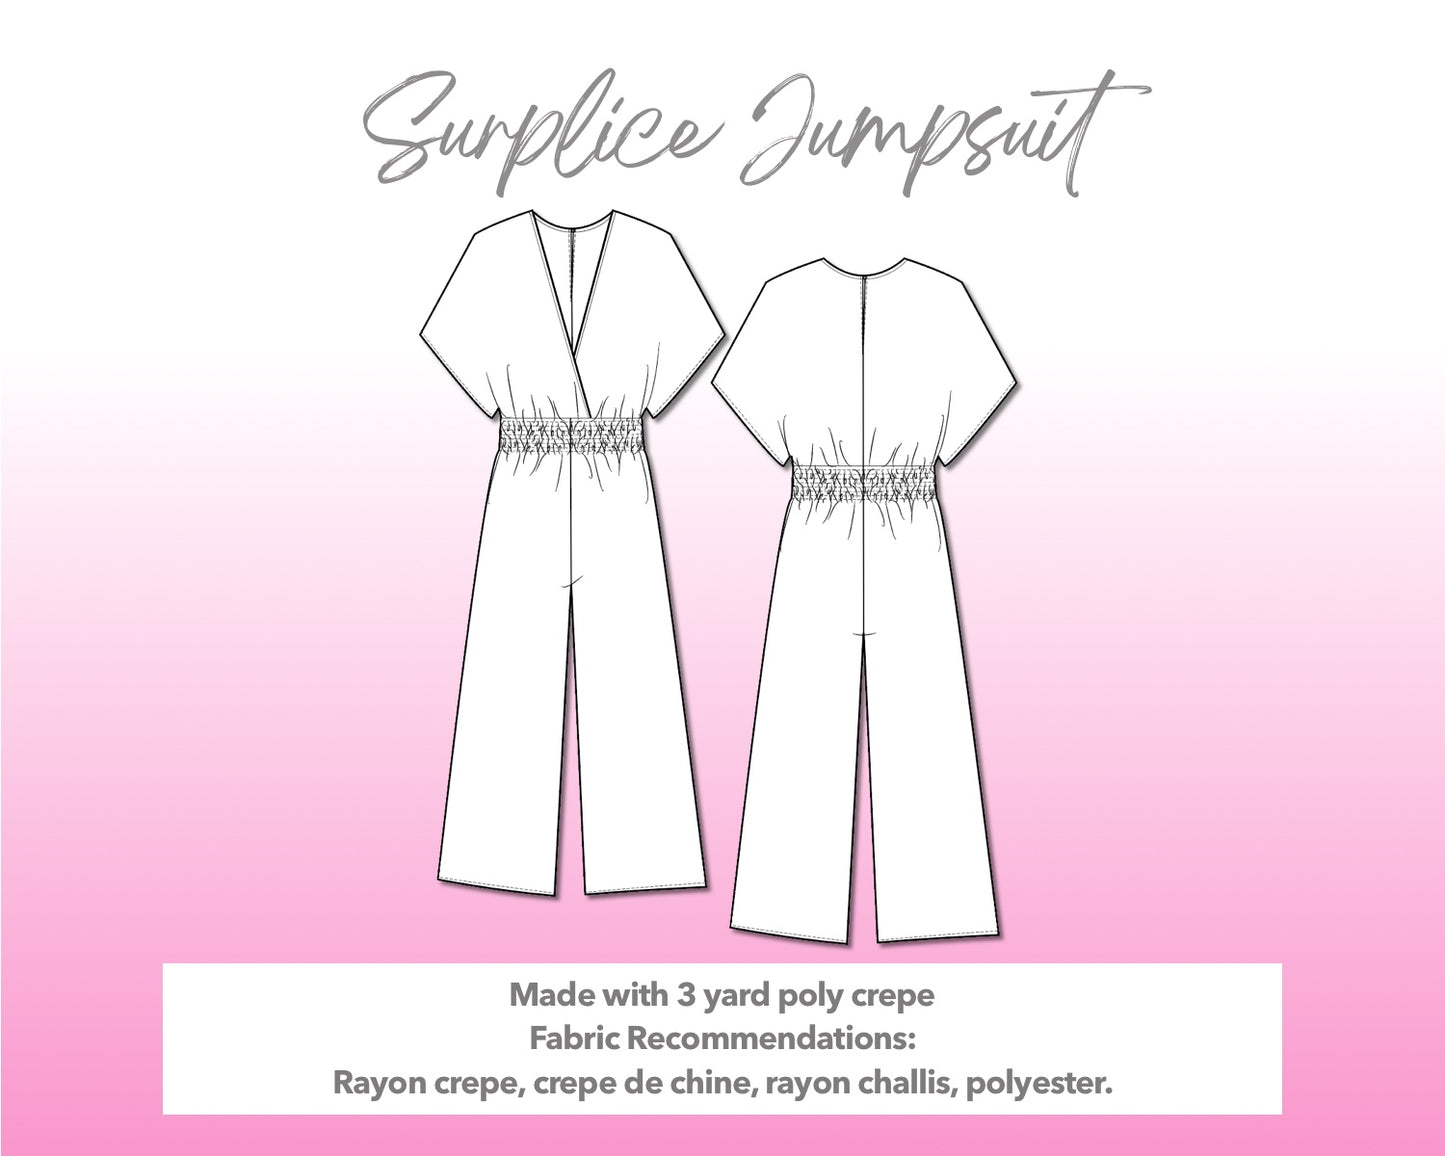 Illustration and detailed description for Surplice Jumpsuit sewing pattern.